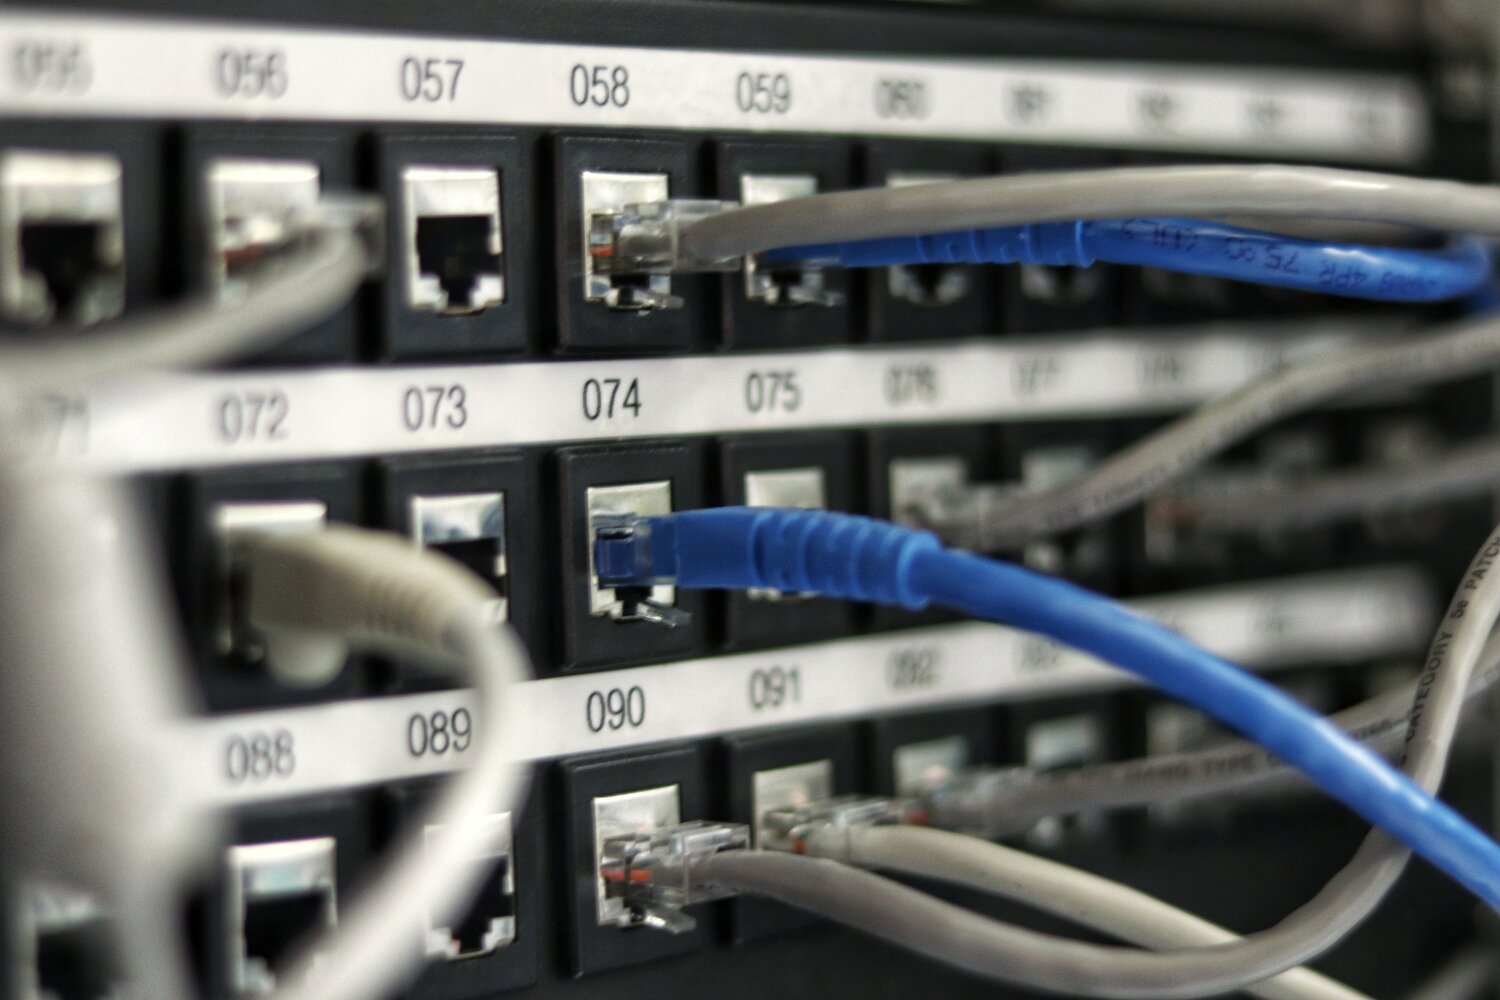 What is Cable Management? — scDataCom